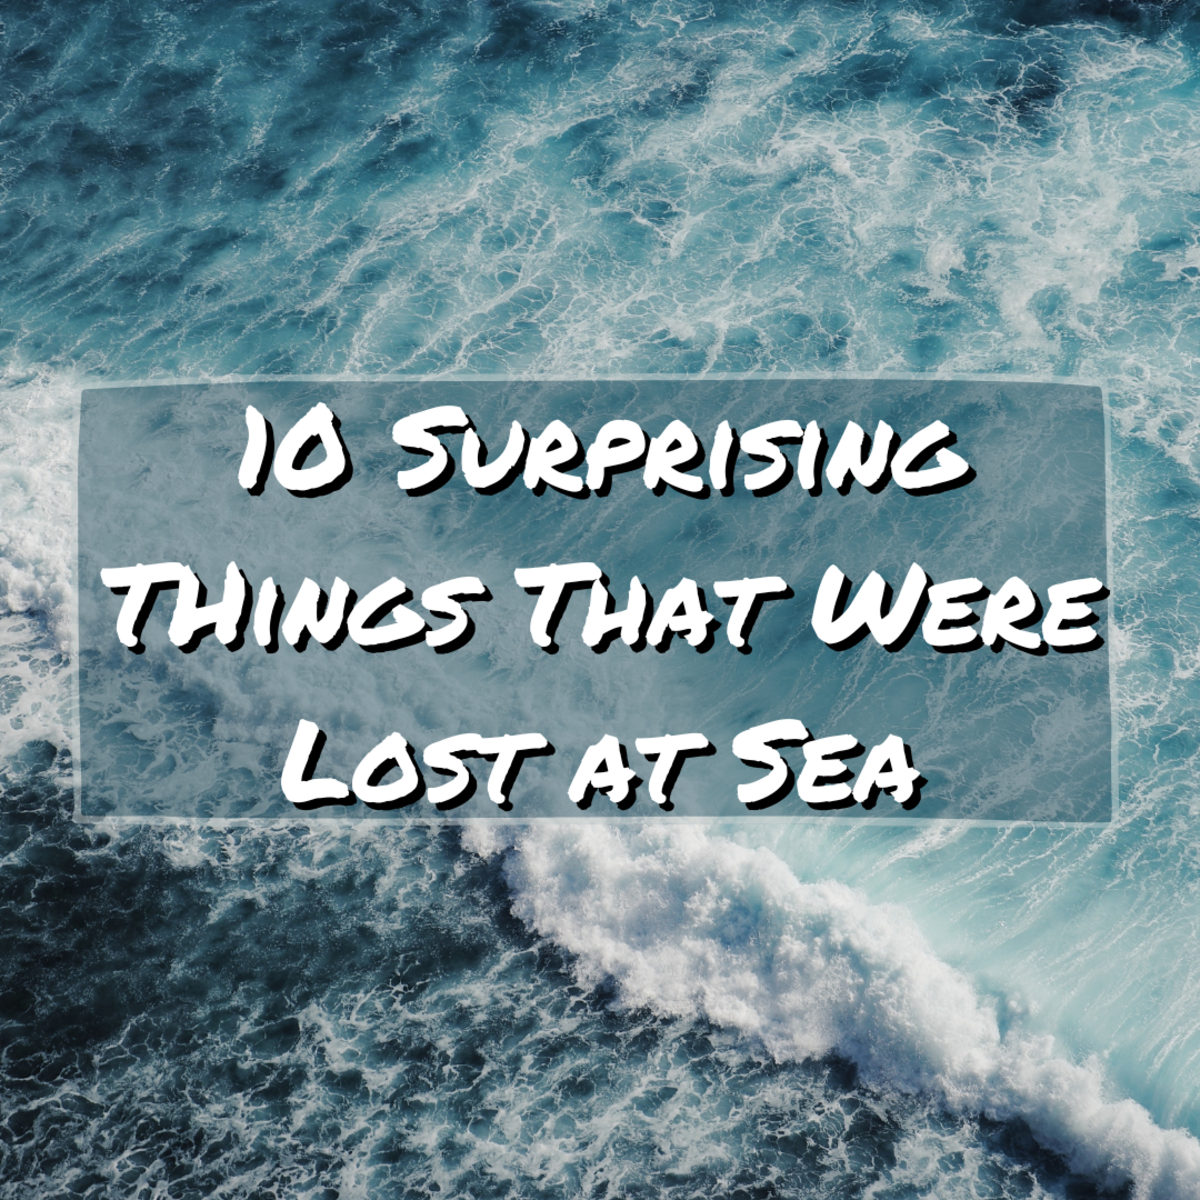 Read on to learn more about a number of interesting things lost at sea, including thousands of cars, an expensive painting, and one country's leader.